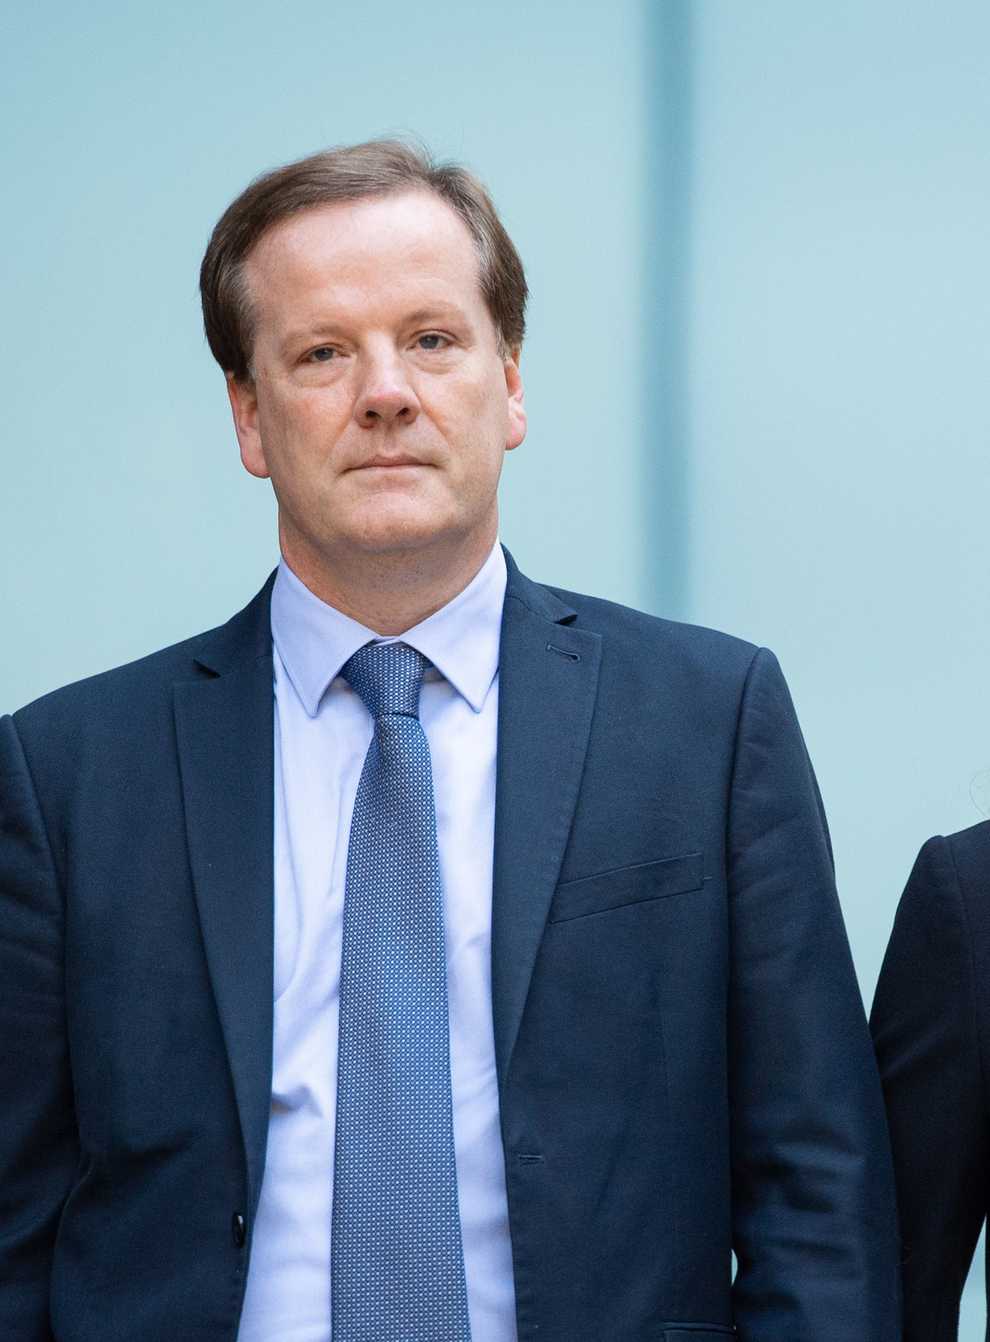 Elphicke, who denied all  the charges, was accompanied by his wife throughout the trial